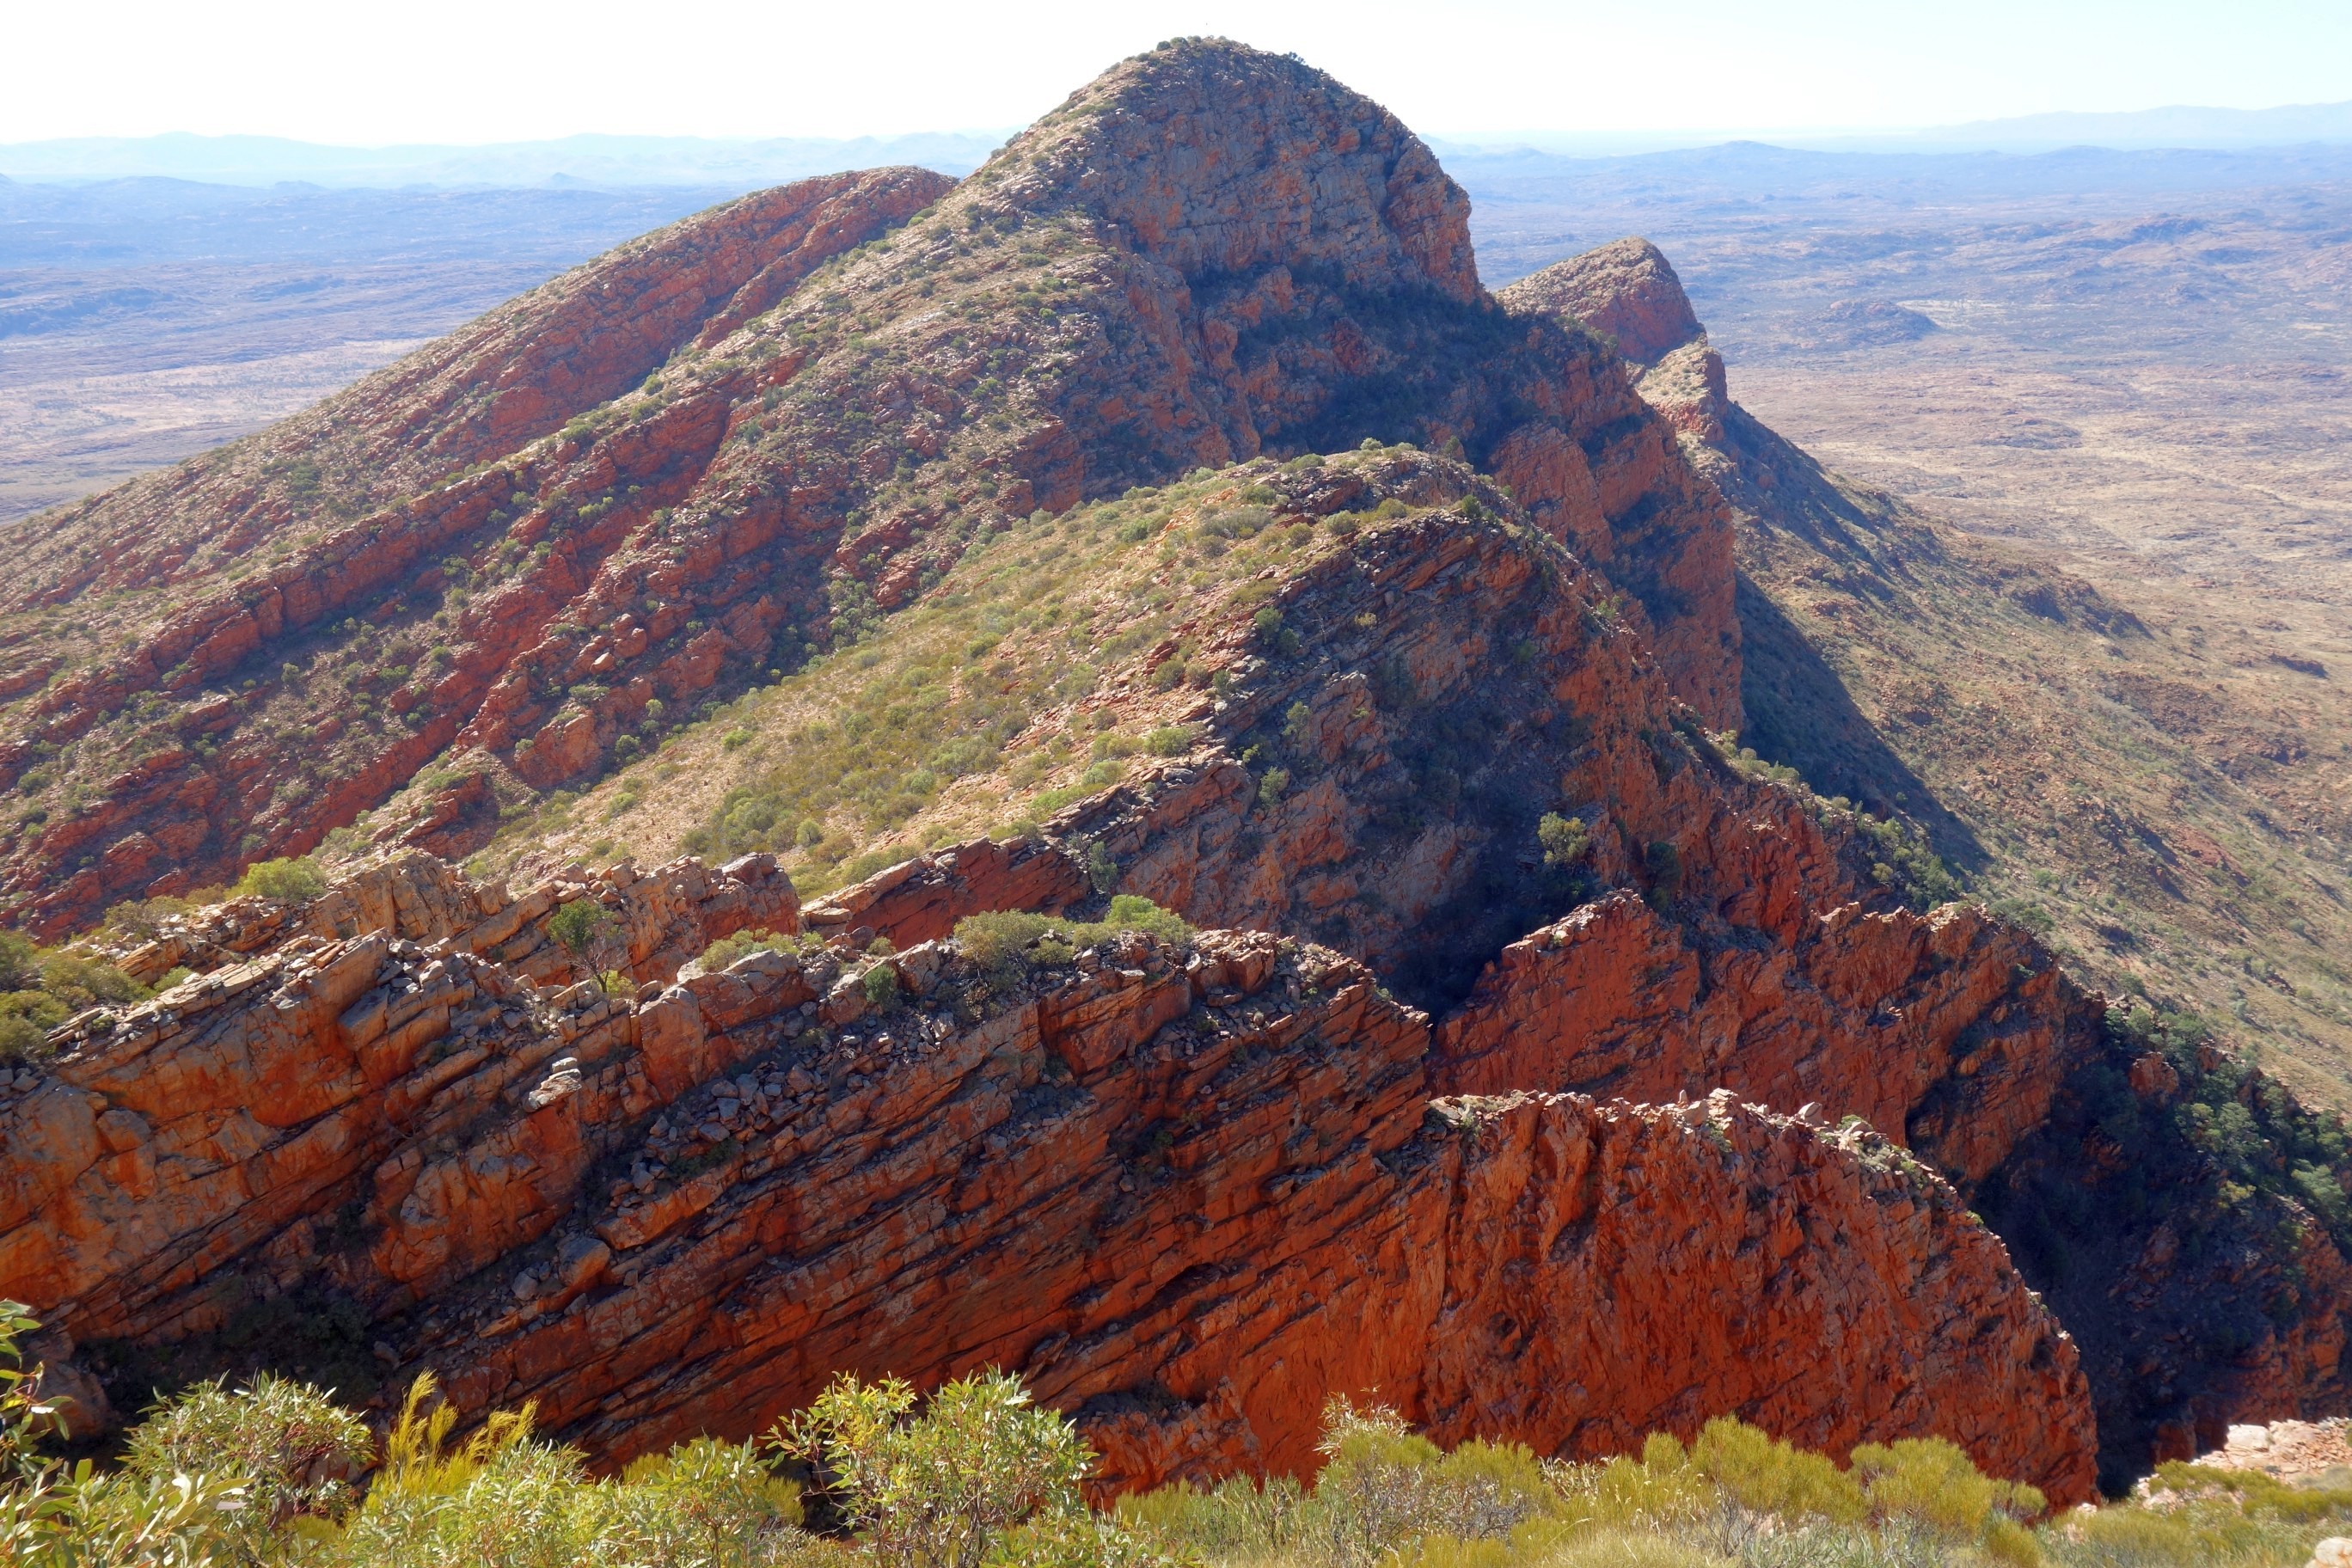 Larapinta Trail Day 1 – Mt Sonder and Redbank Gorge (Section 12)